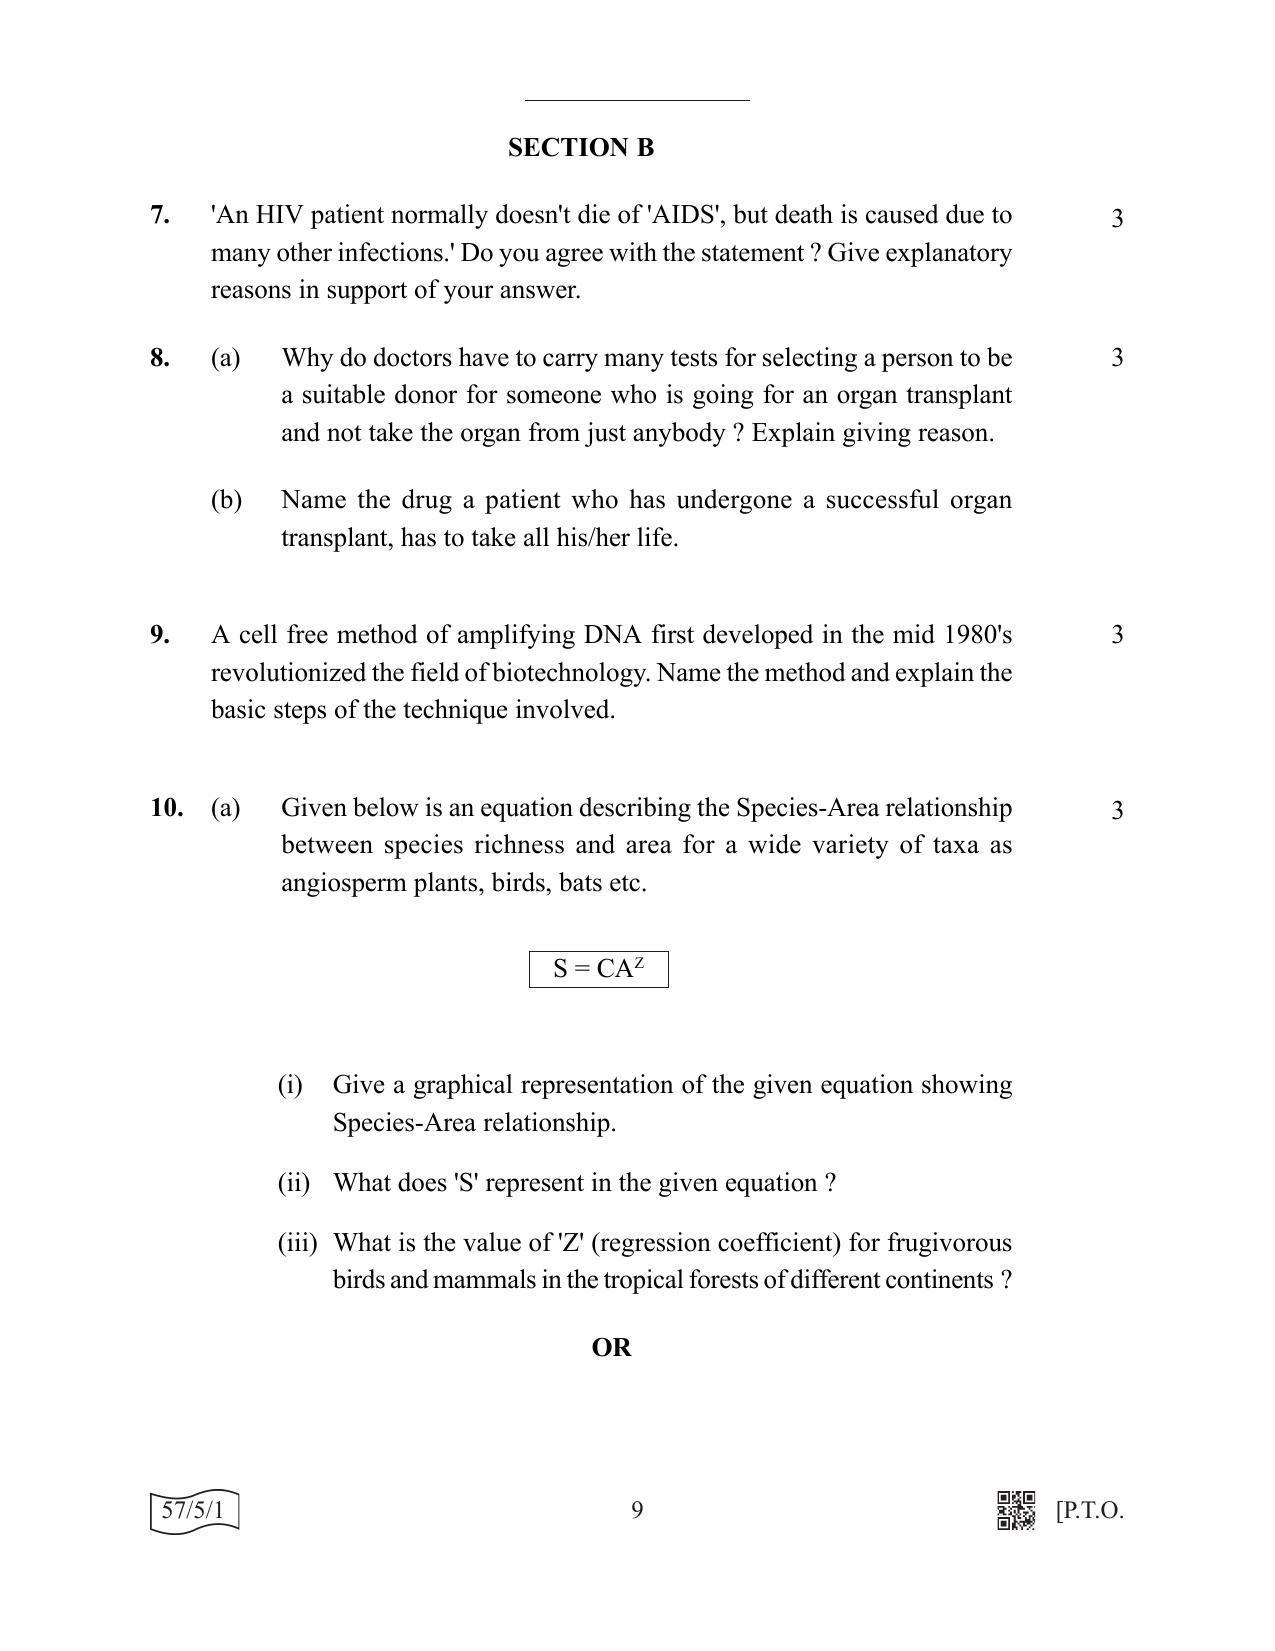 CBSE Class 12 57-5-1 Biology 2022 Question Paper - Page 9